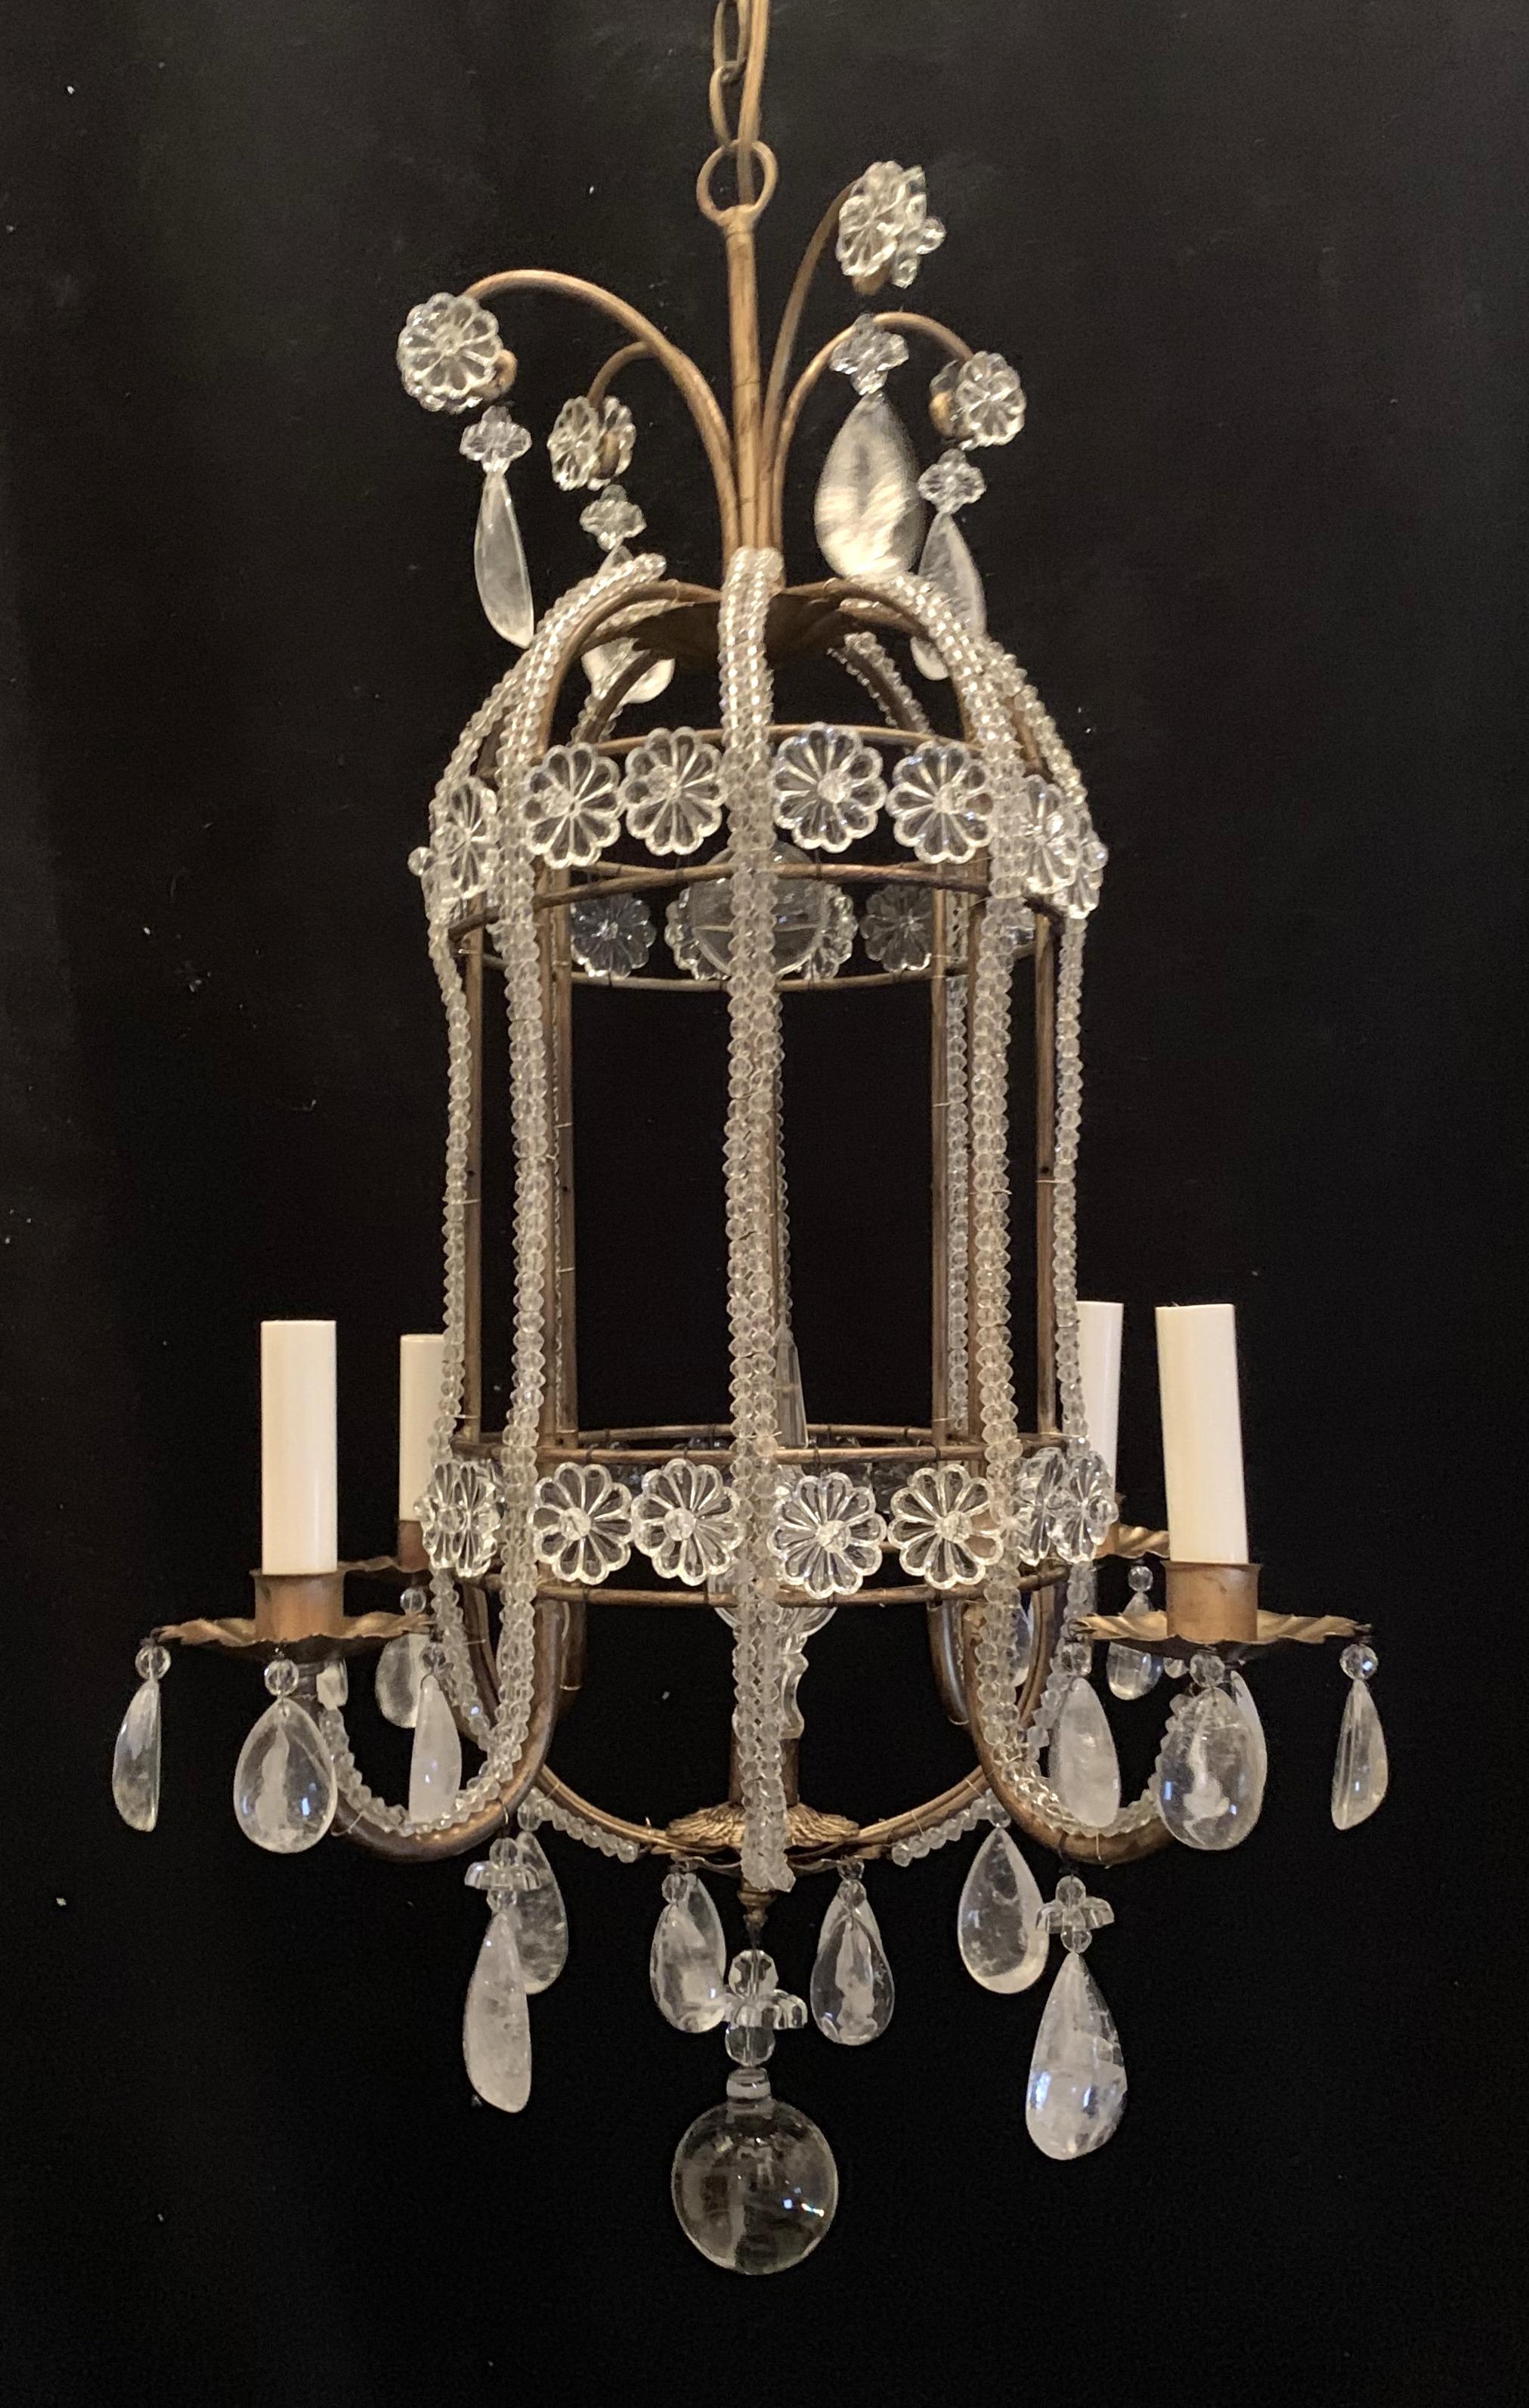 A wonderful beaded Italian Baguès pagoda style rock crystal, gold gilt fixture with crystal flower this chandelier has 4 candelabra lights that have been completely rewired with new sockets.